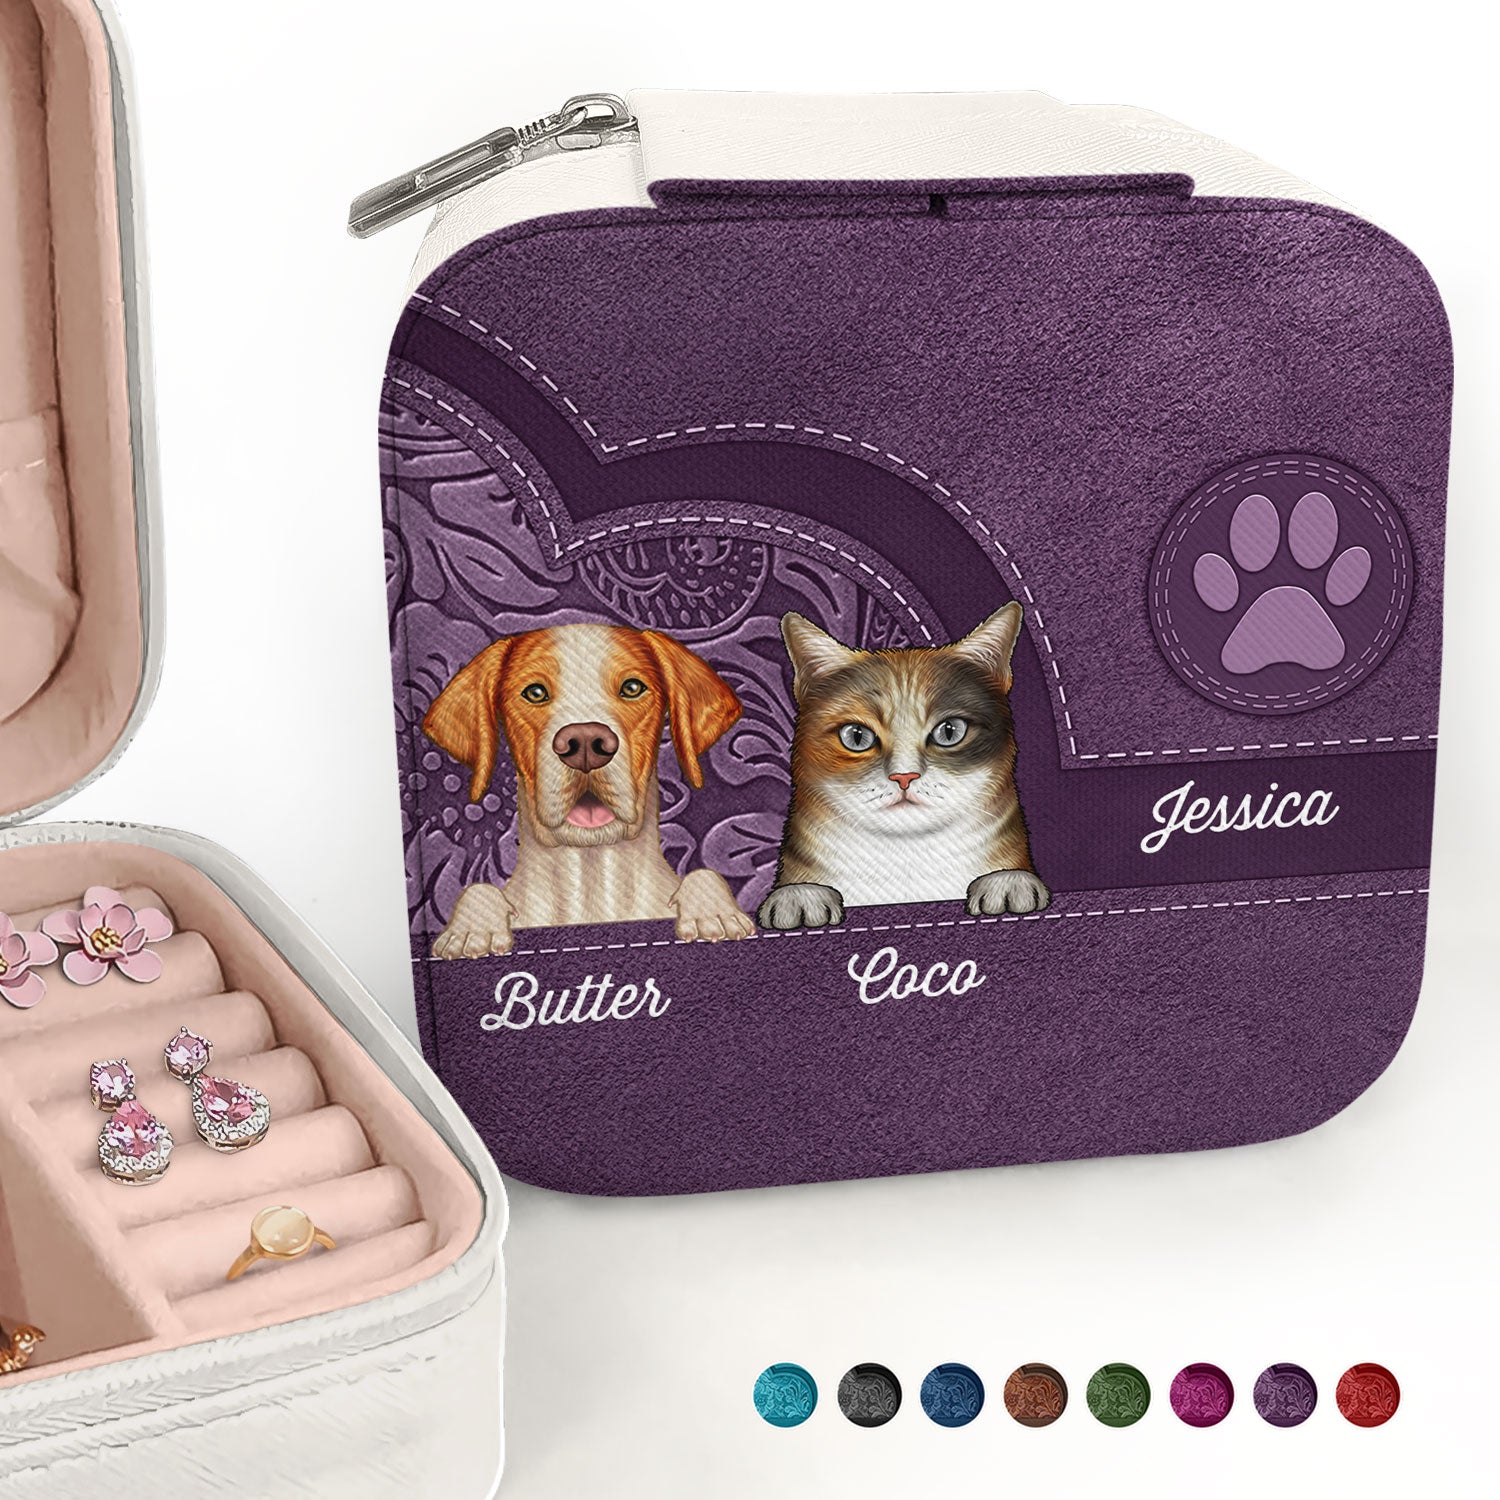 Cute Dogs And Cats Aesthetic Pattern - Birthday, Loving Gift For Pet Lovers, Dog Mom, Cat Mom - Personalized Jewelry Box